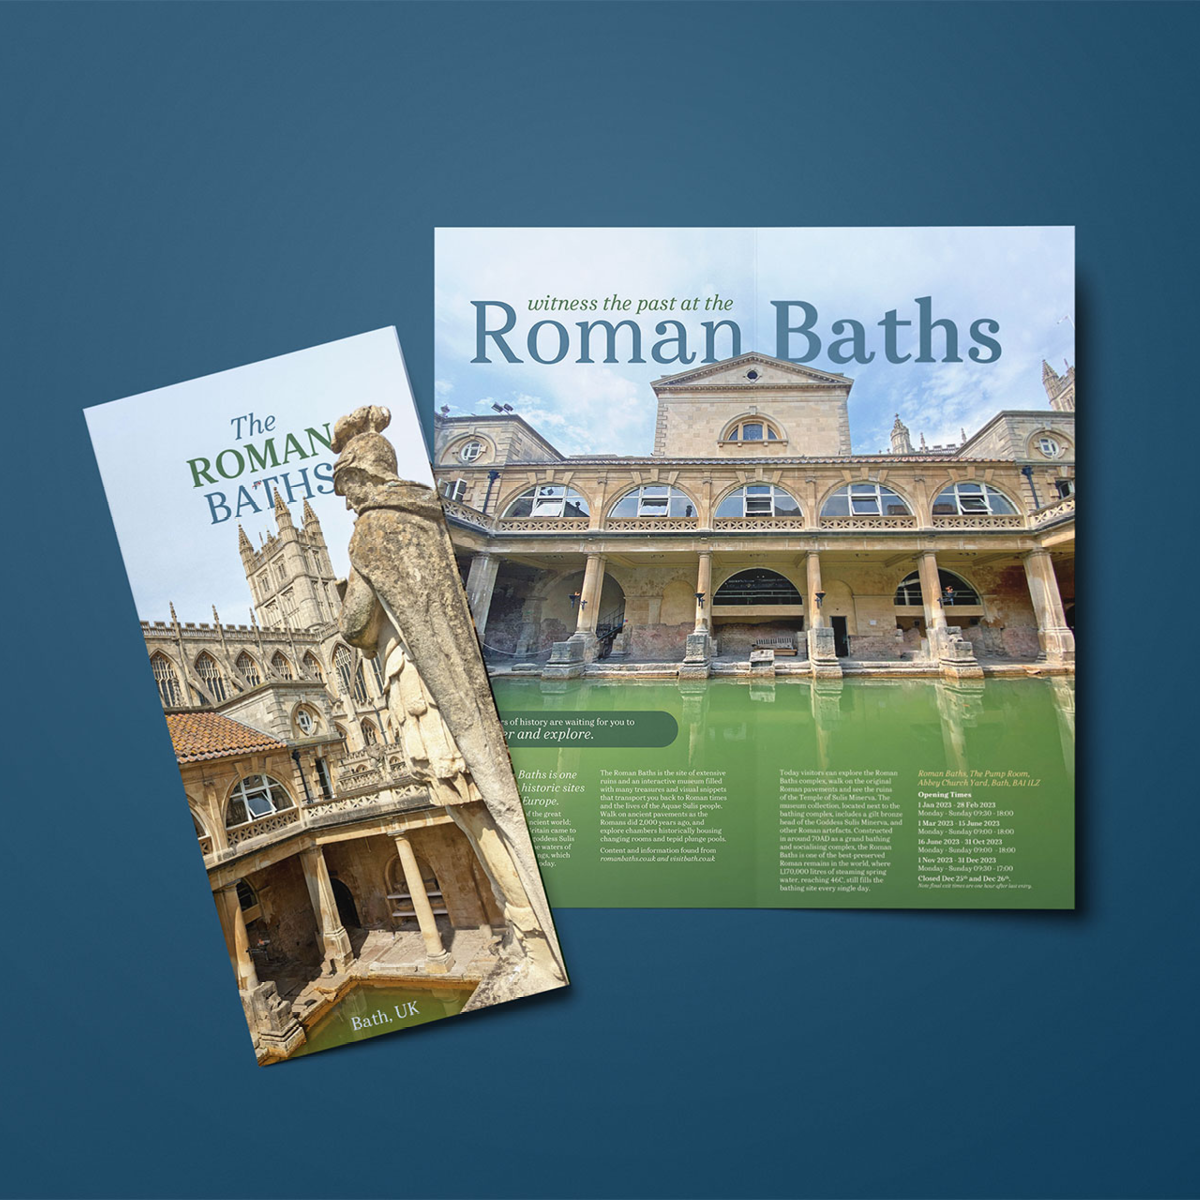 A Travel Brochure about the Roman Baths set in Lady Somerset.